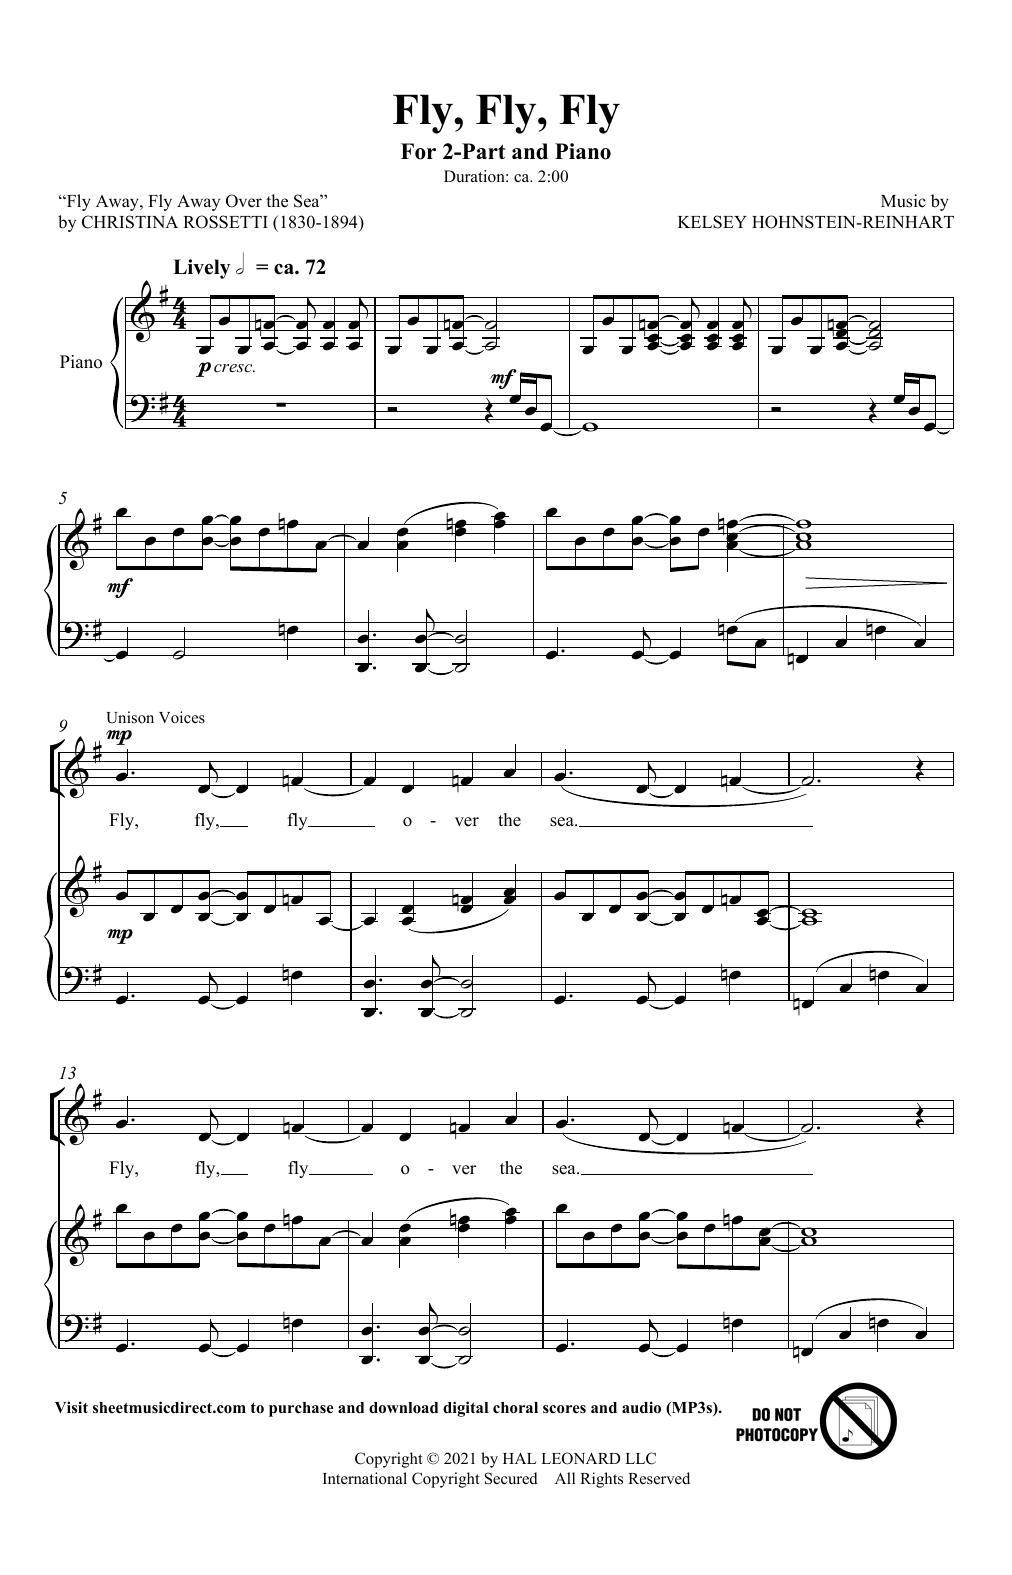 Download Kelsey Hohnstein-Reinhart Fly, Fly, Fly Sheet Music